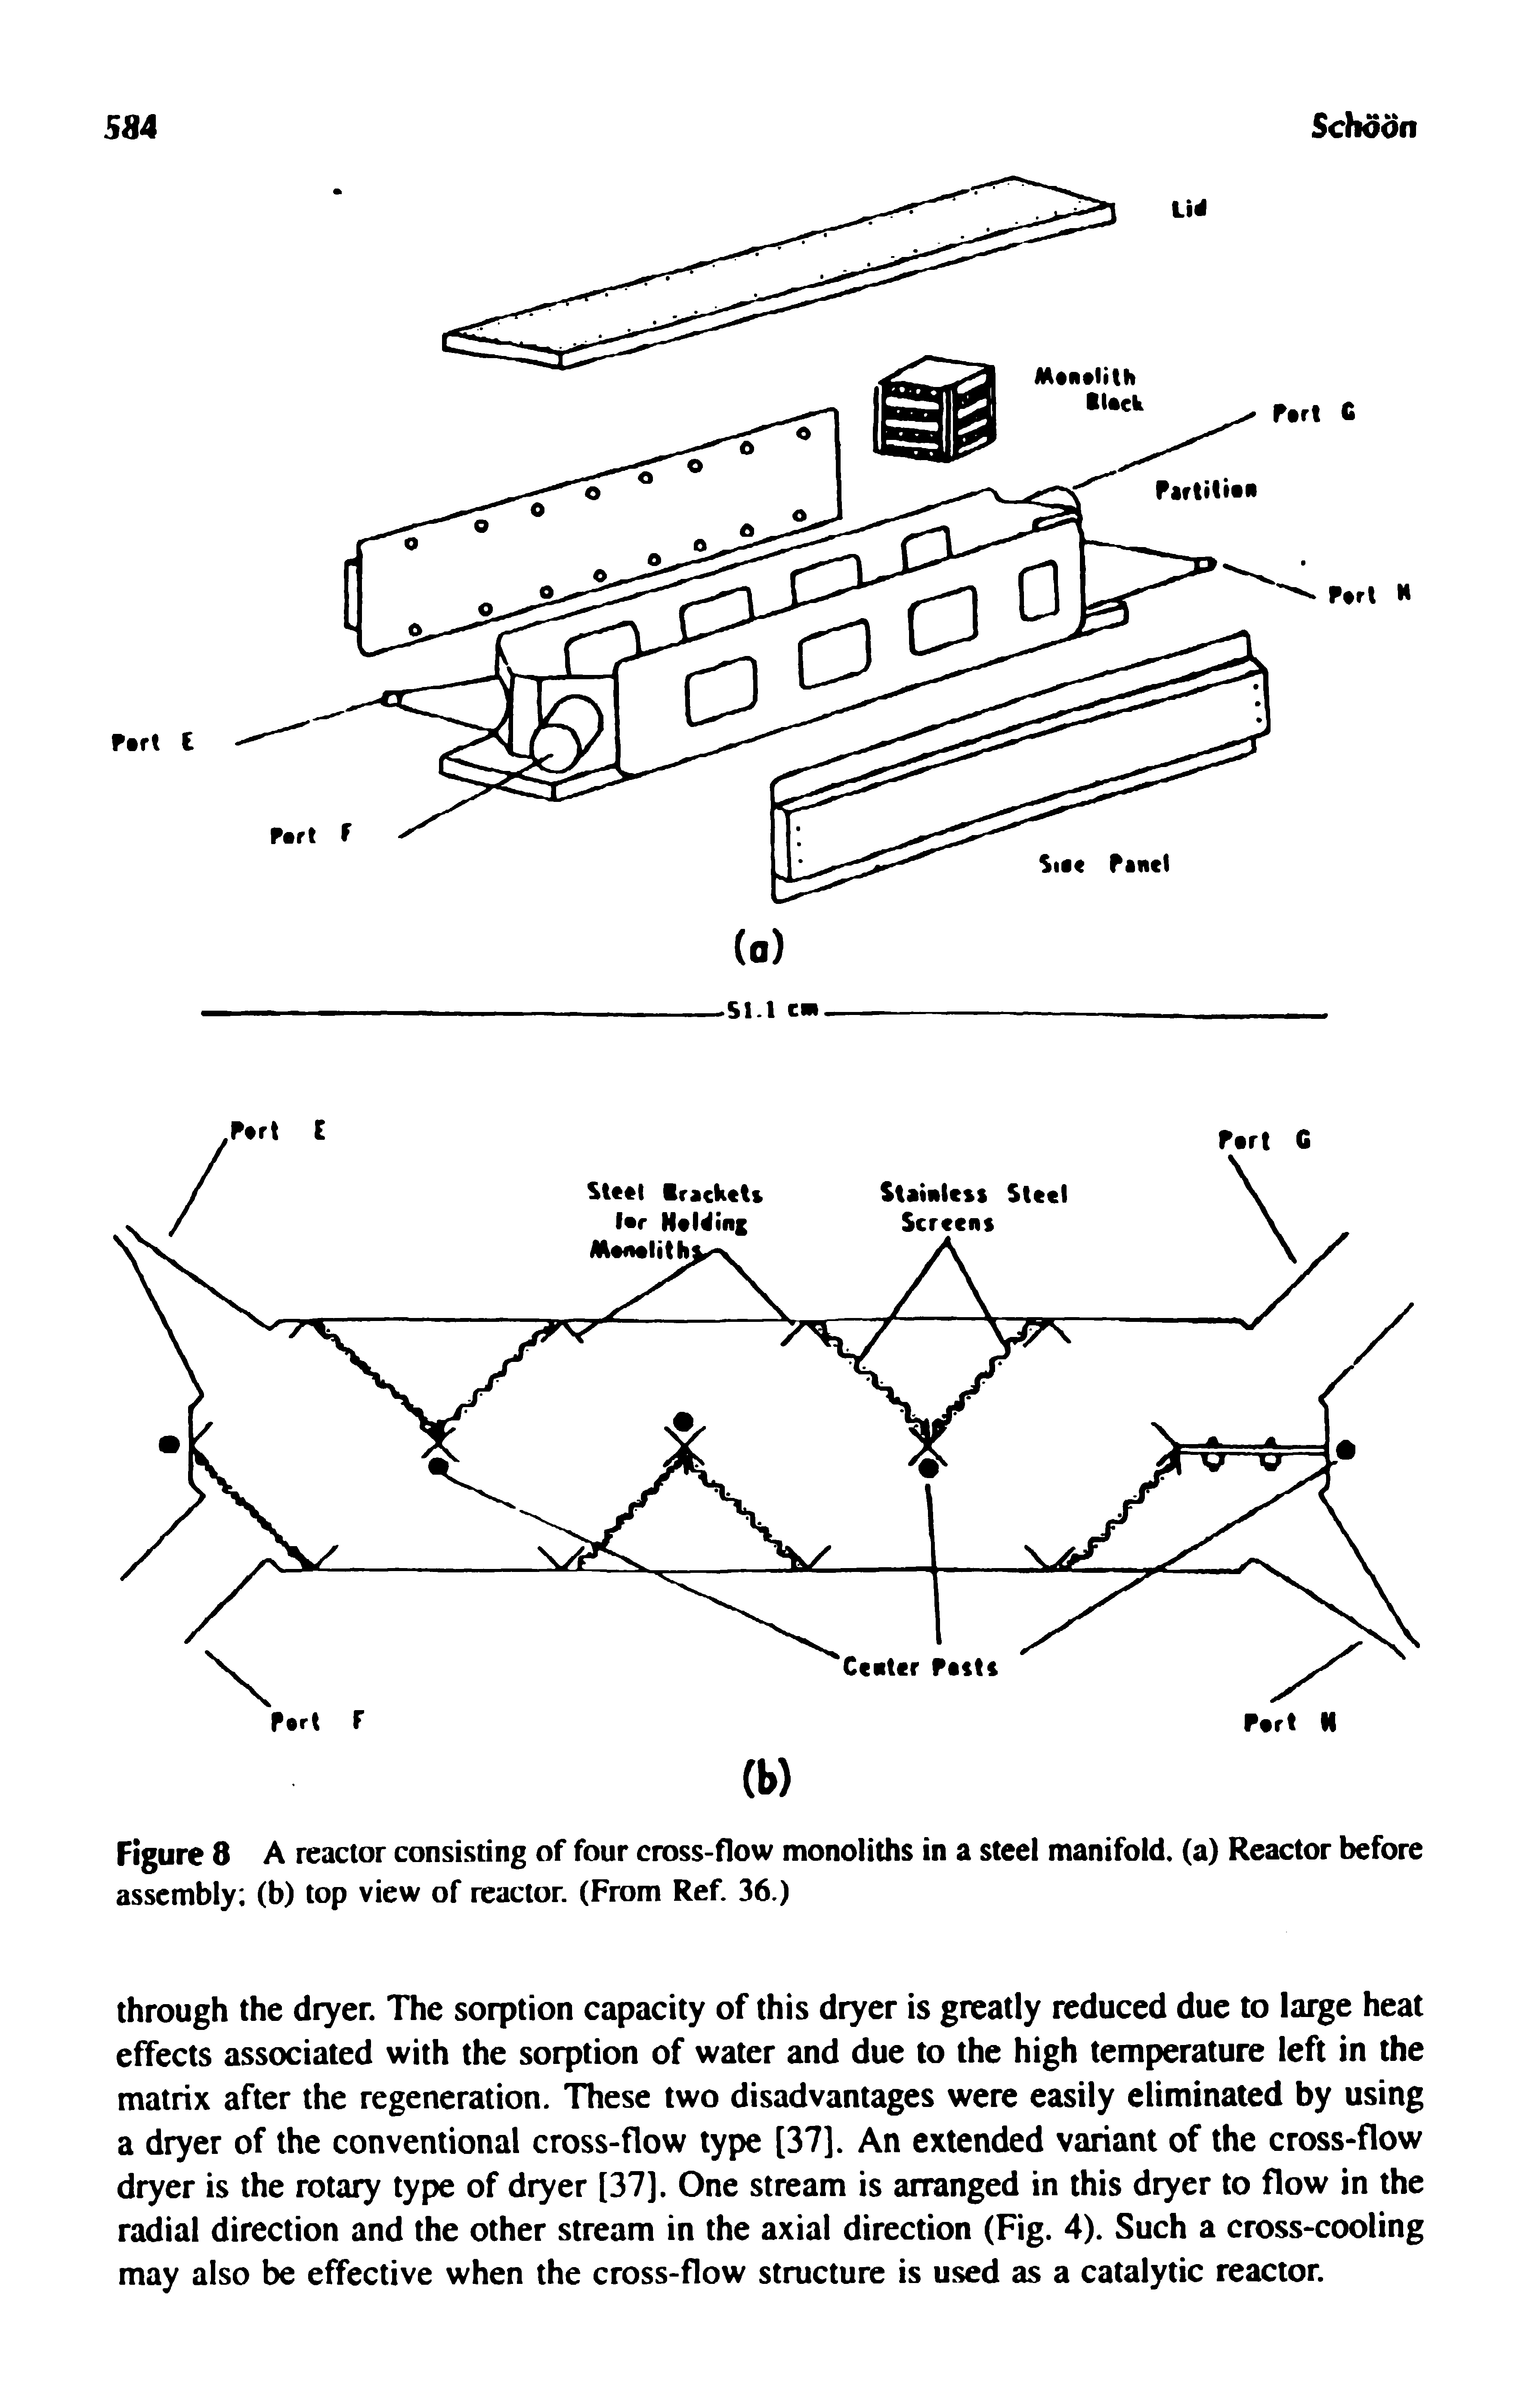 Figure 8 A reactor consisting of four cross-flow monoliths in a steel manifold, (a) Reactor before assembly (b) top view of reactor. (From Ref. 36.)...